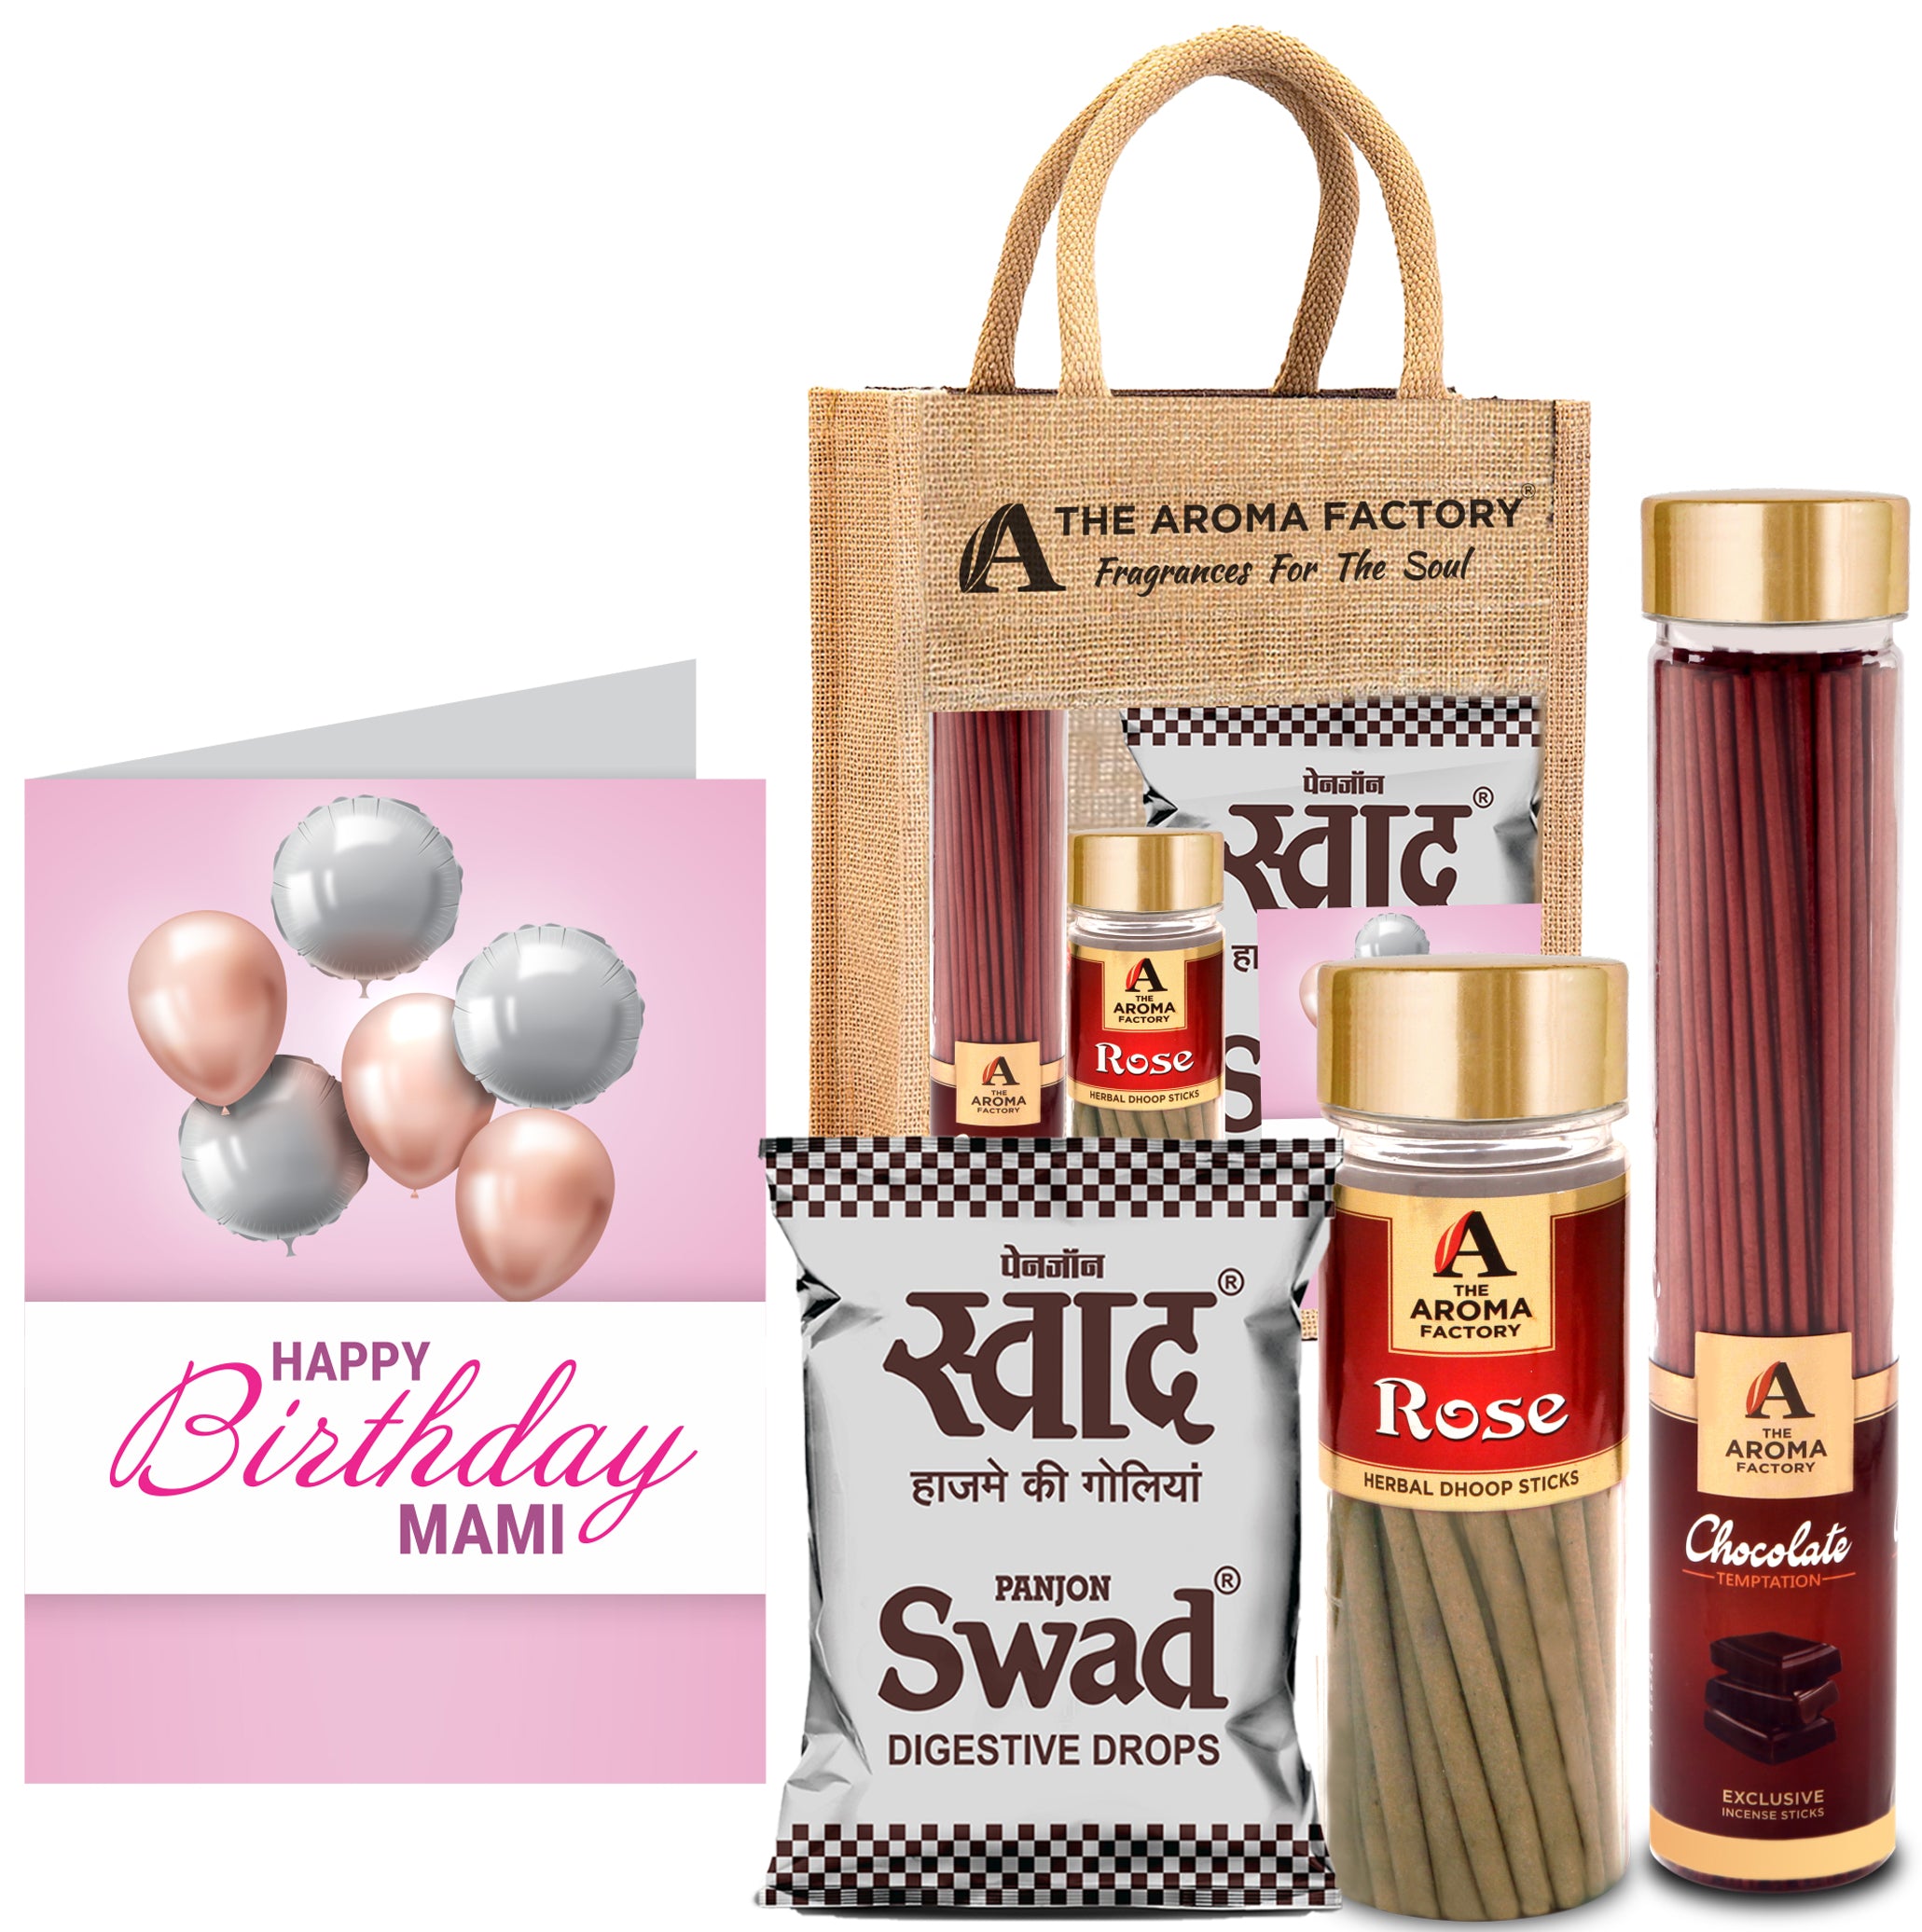 The Aroma Factory Happy Birthday Mami Gift with Card (25 Swad Candy, Chocolate Agarbatti Bottle, Rose Dhoopbatti) in Jute Bag